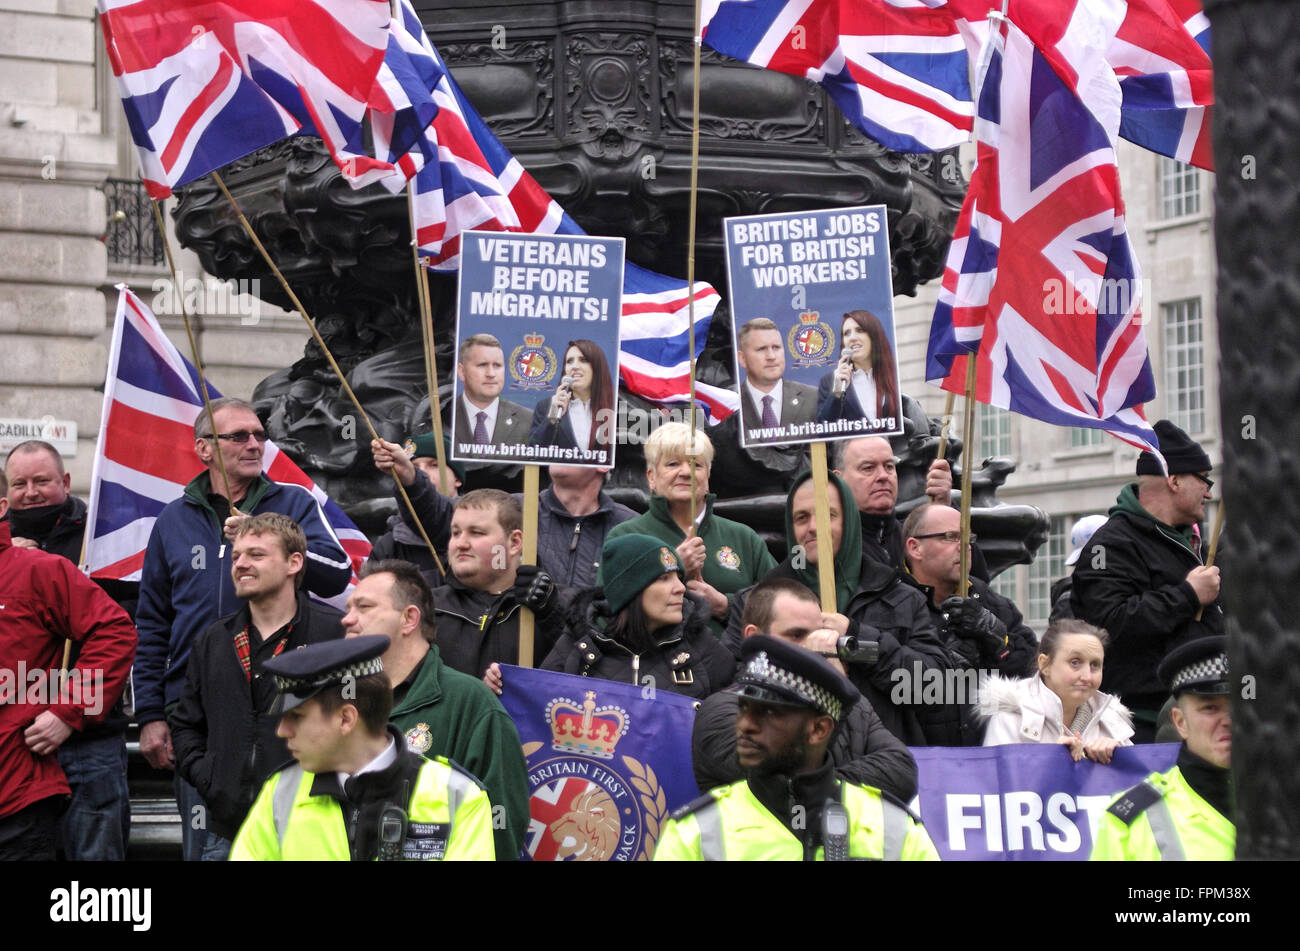 London, UK. Saturday 19th March 2016. Anti-refugee Britain First members are protected from antifascist protestors by police. Stock Photo